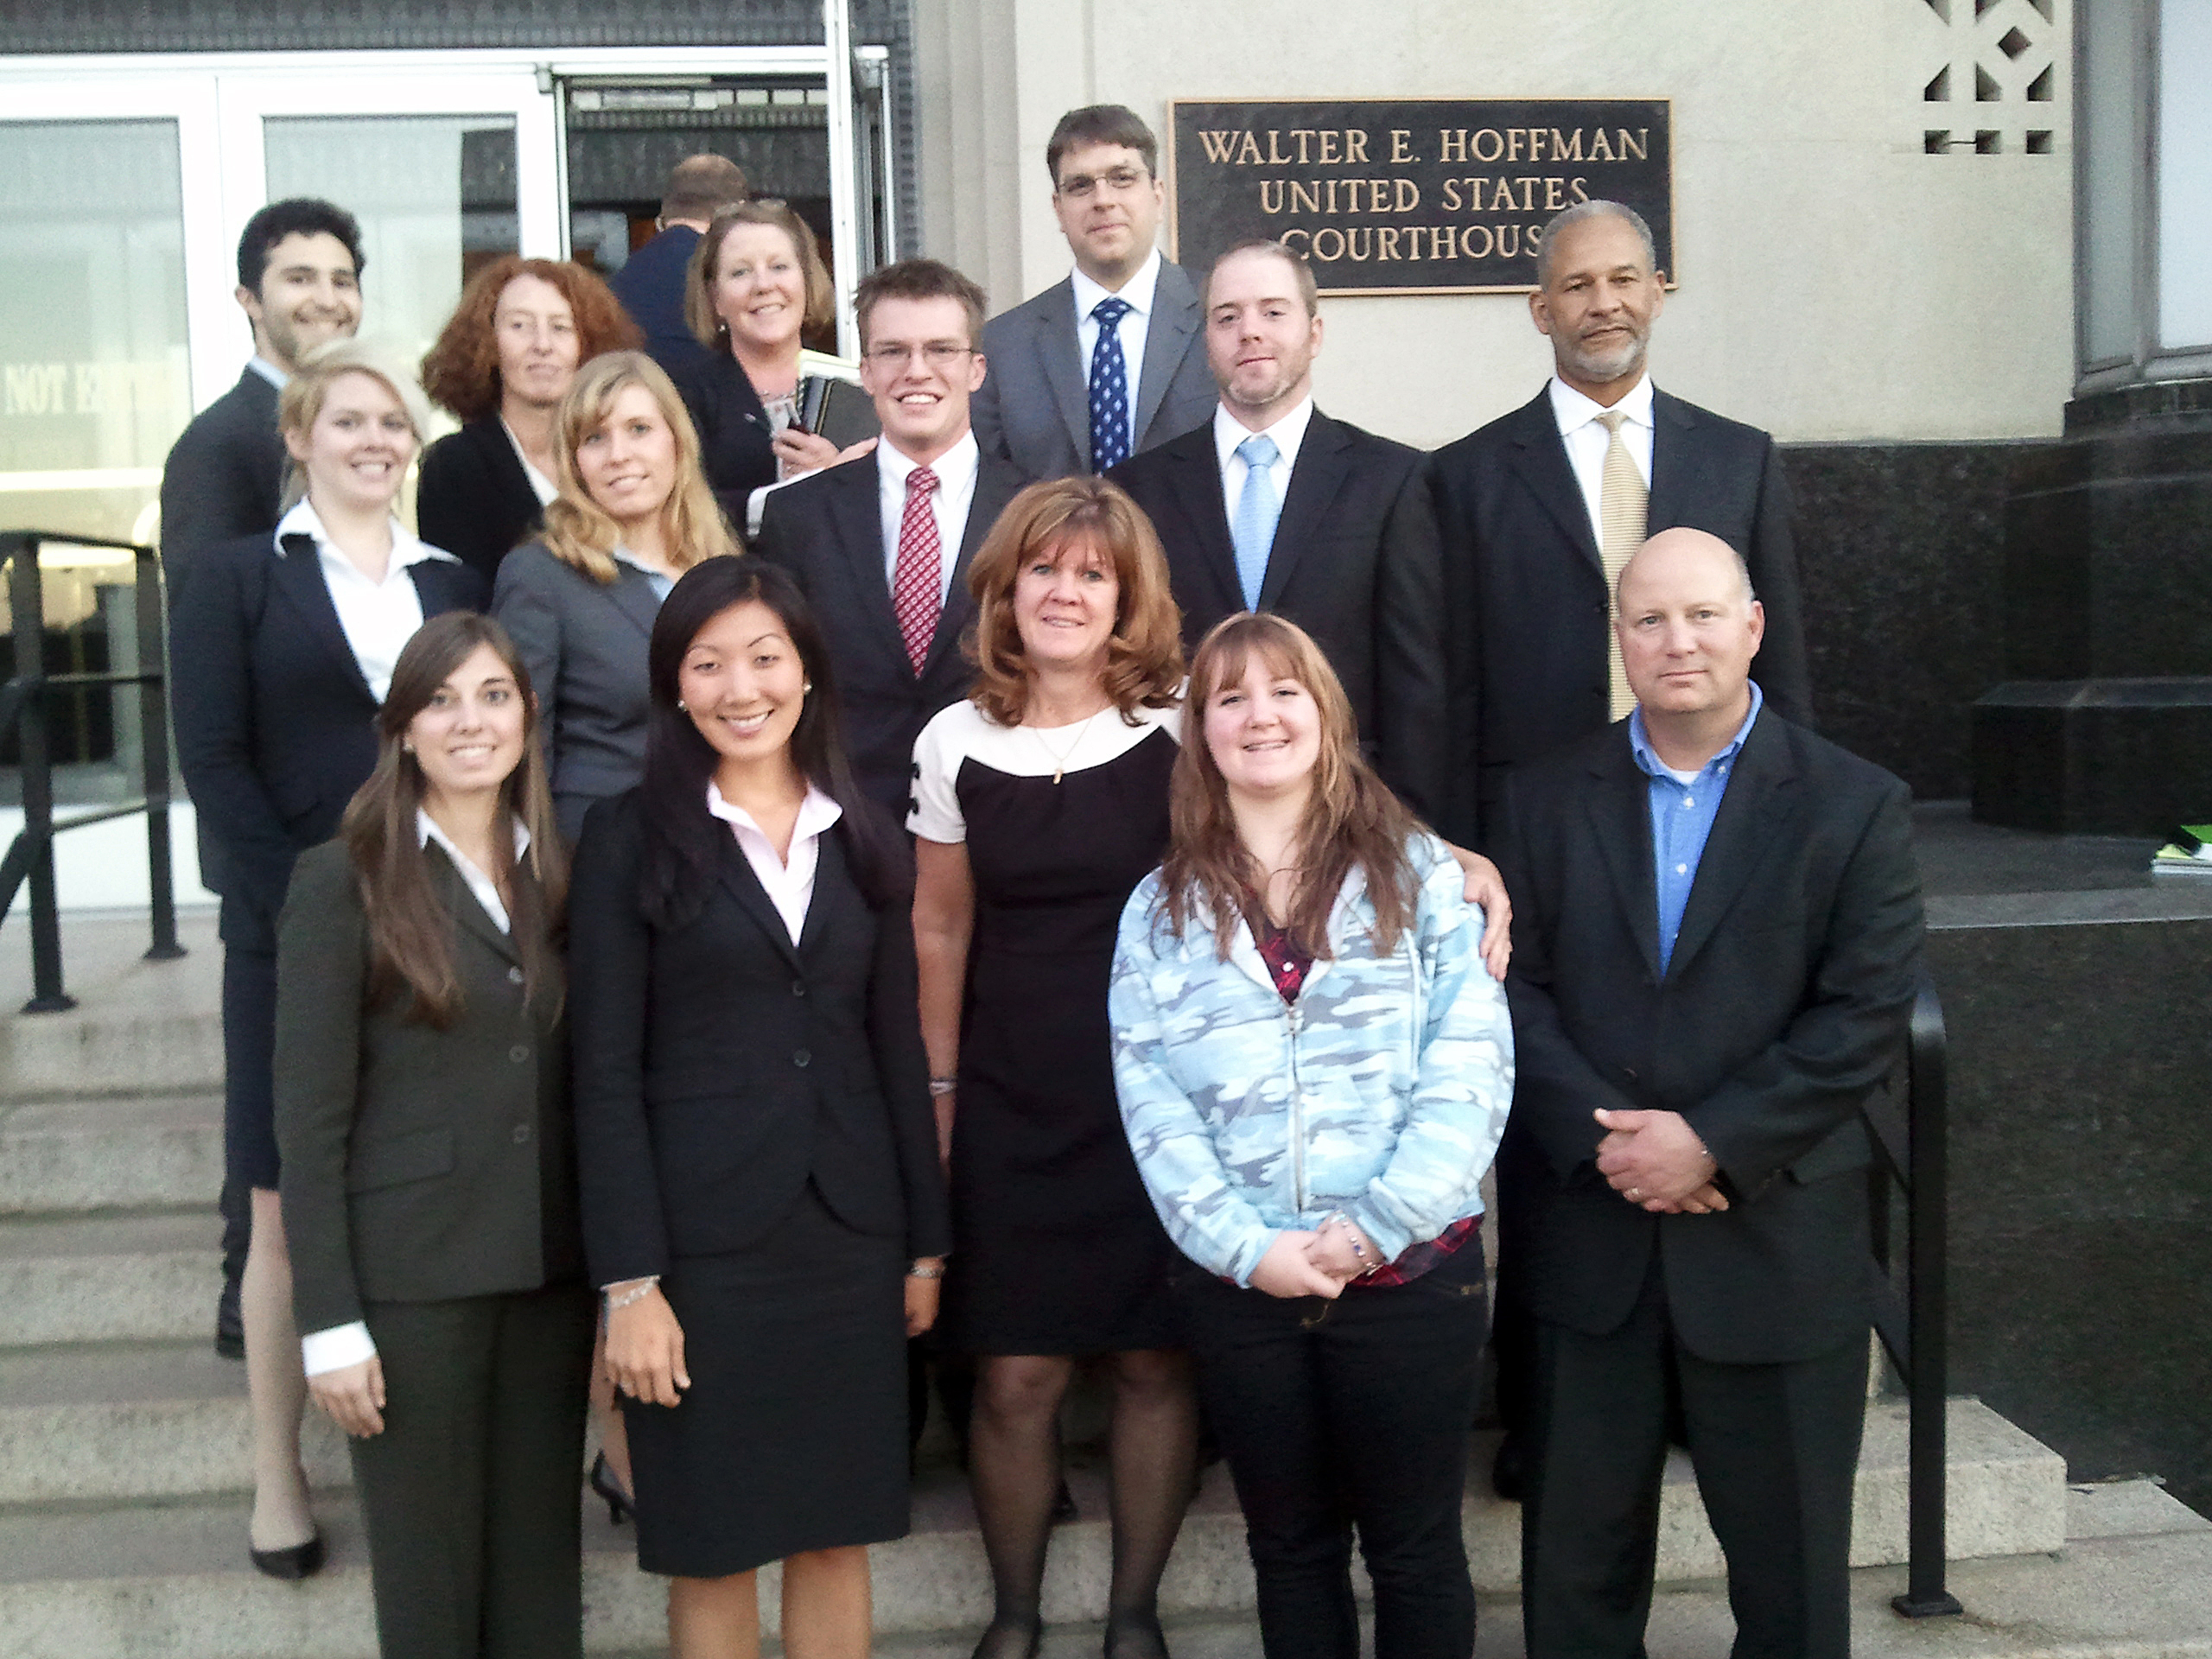 Group photo on the steps of a USA courthouse